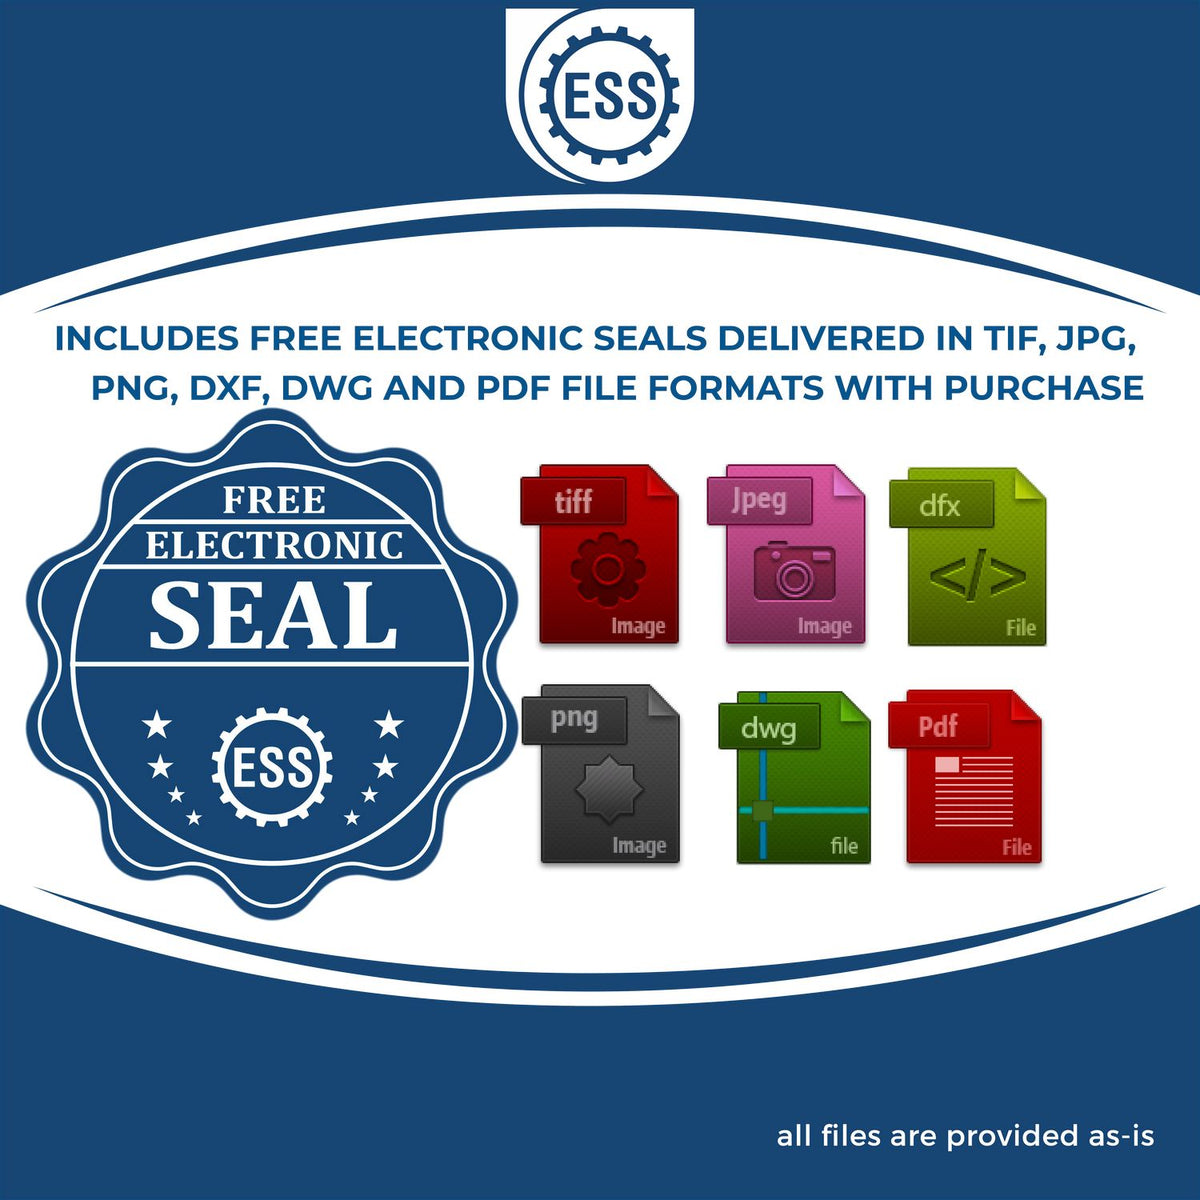 An infographic for the free electronic seal for the Missouri Desk Architect Embossing Seal illustrating the different file type icons such as DXF, DWG, TIF, JPG and PNG.